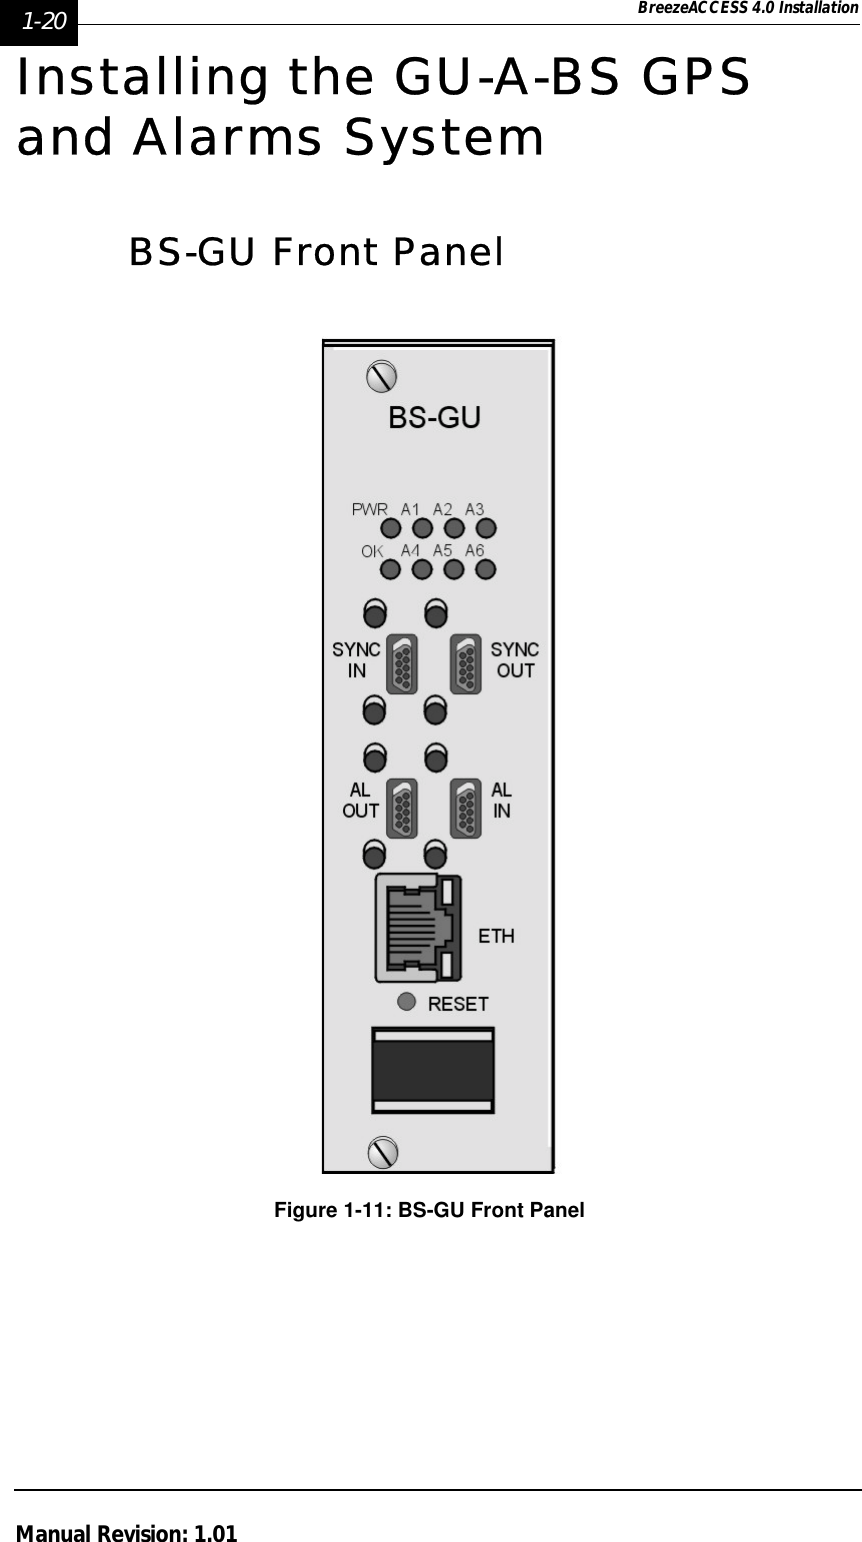 1-20 BreezeACCESS 4.0 InstallationManual Revision: 1.01Installing the GU-A-BS GPS and Alarms SystemBS-GU Front PanelFigure 1-11: BS-GU Front Panel